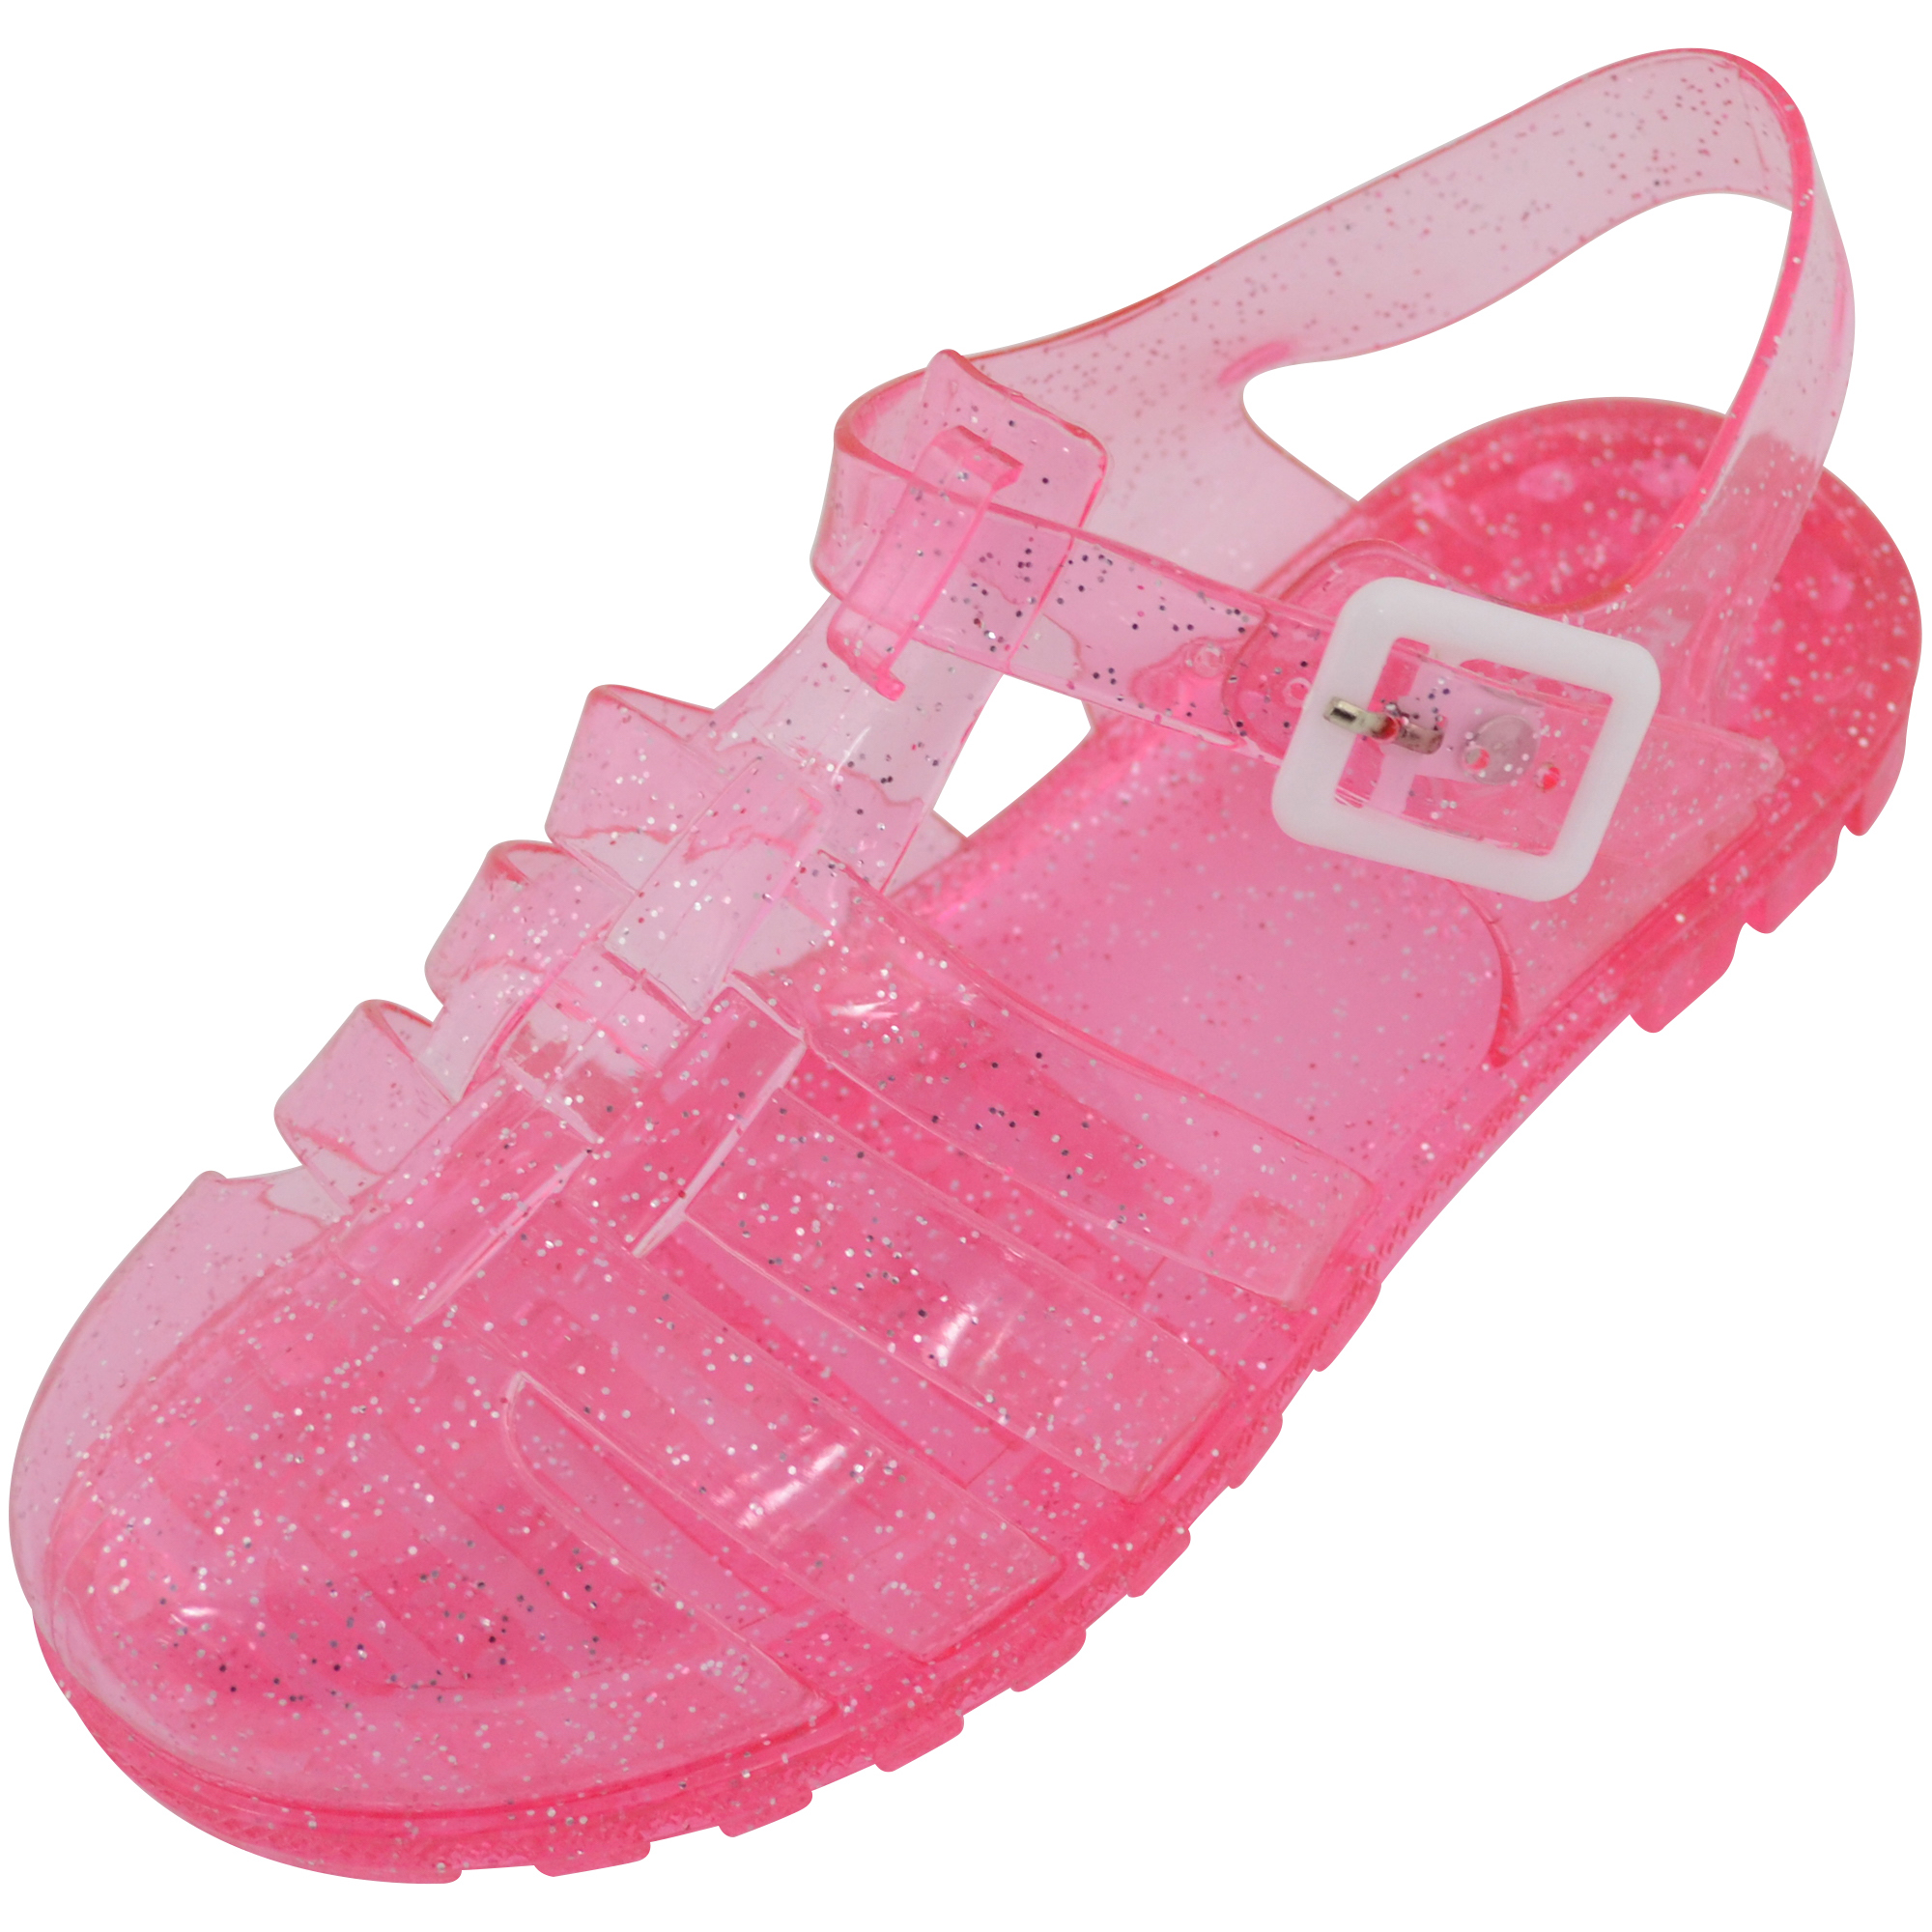 summer jelly shoes